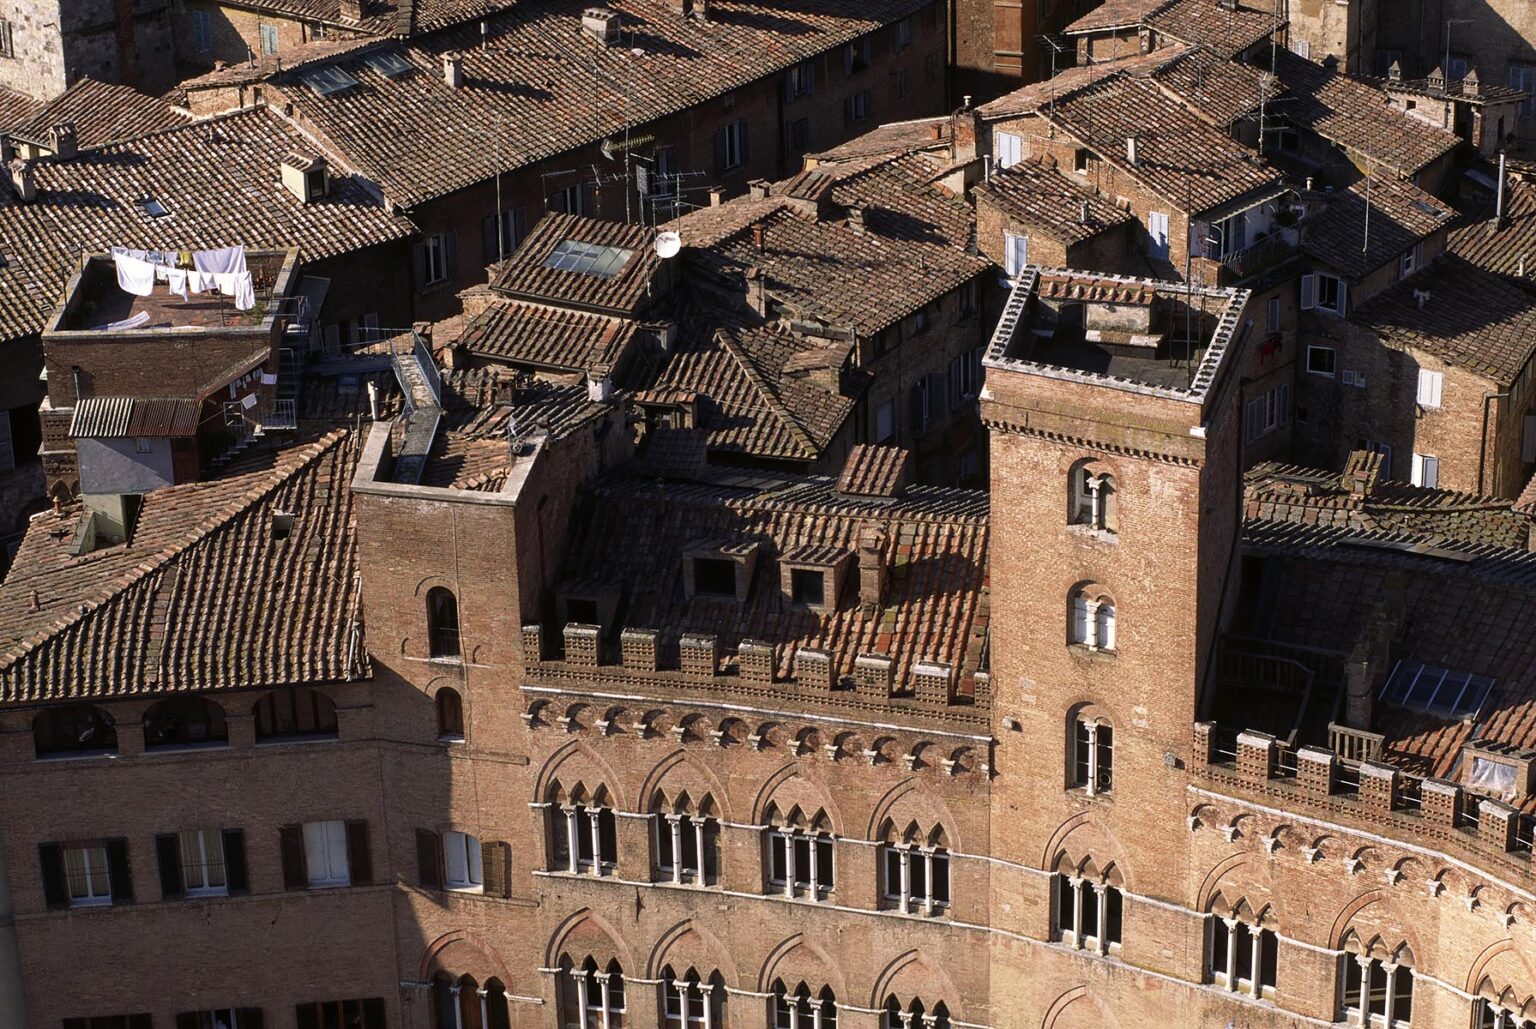 Old Palace on the CAMPO (Central Plaza) in the Medieval city of SIENA - TUSCANY, ITALY